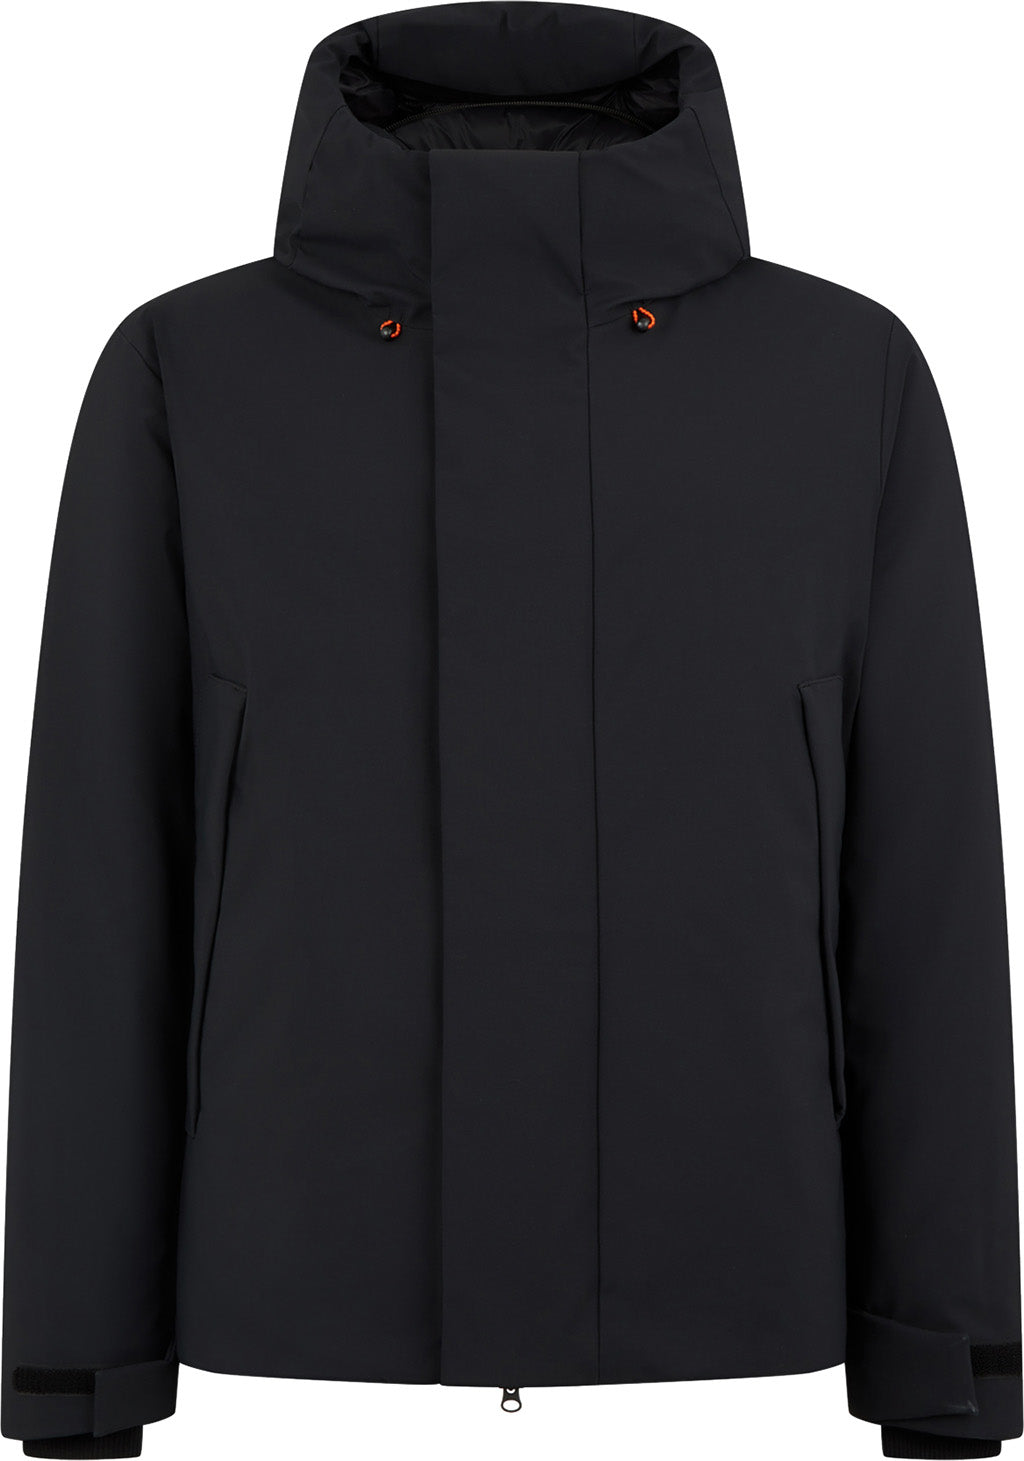 Save the Duck TIGER: Save The Duck Hooded Jacket – Men's 